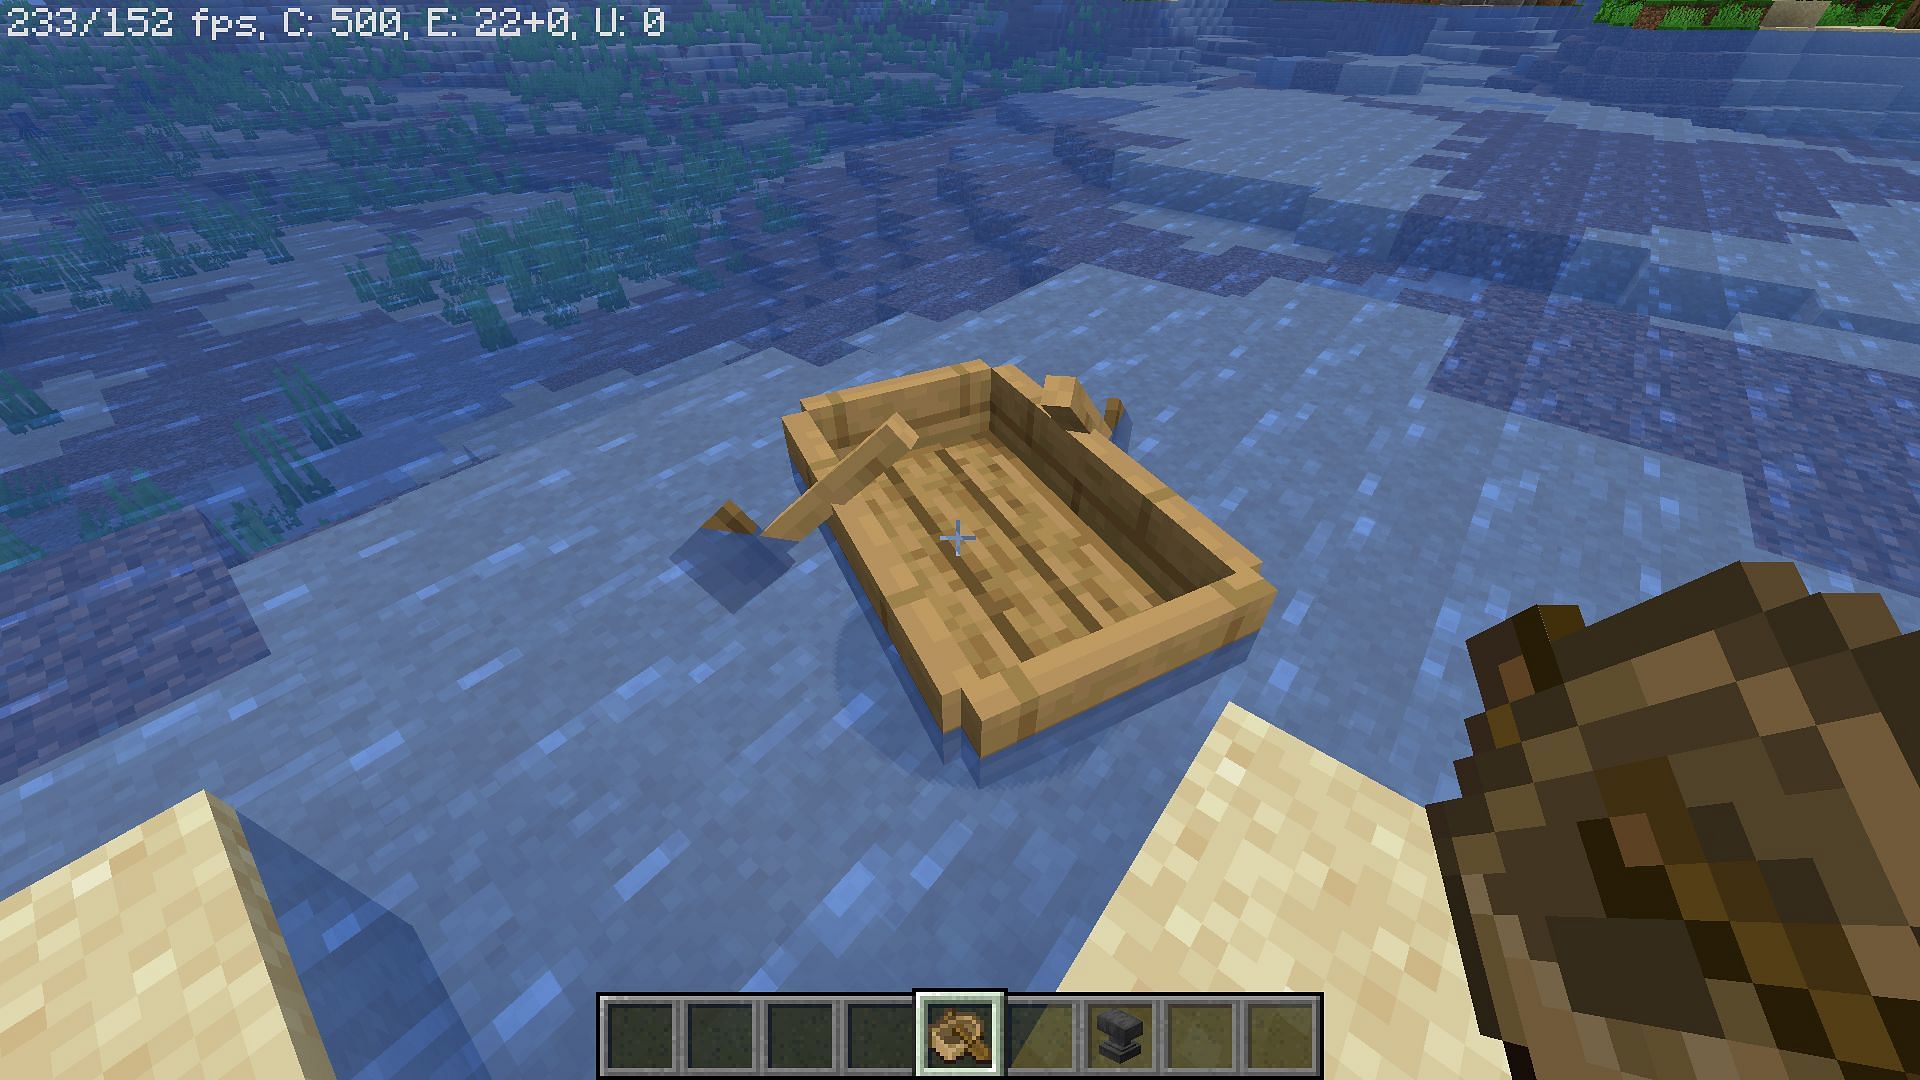 Boats can also save players if they place and sit on it as quickly as possible in Minecraft (Image via Mojang)